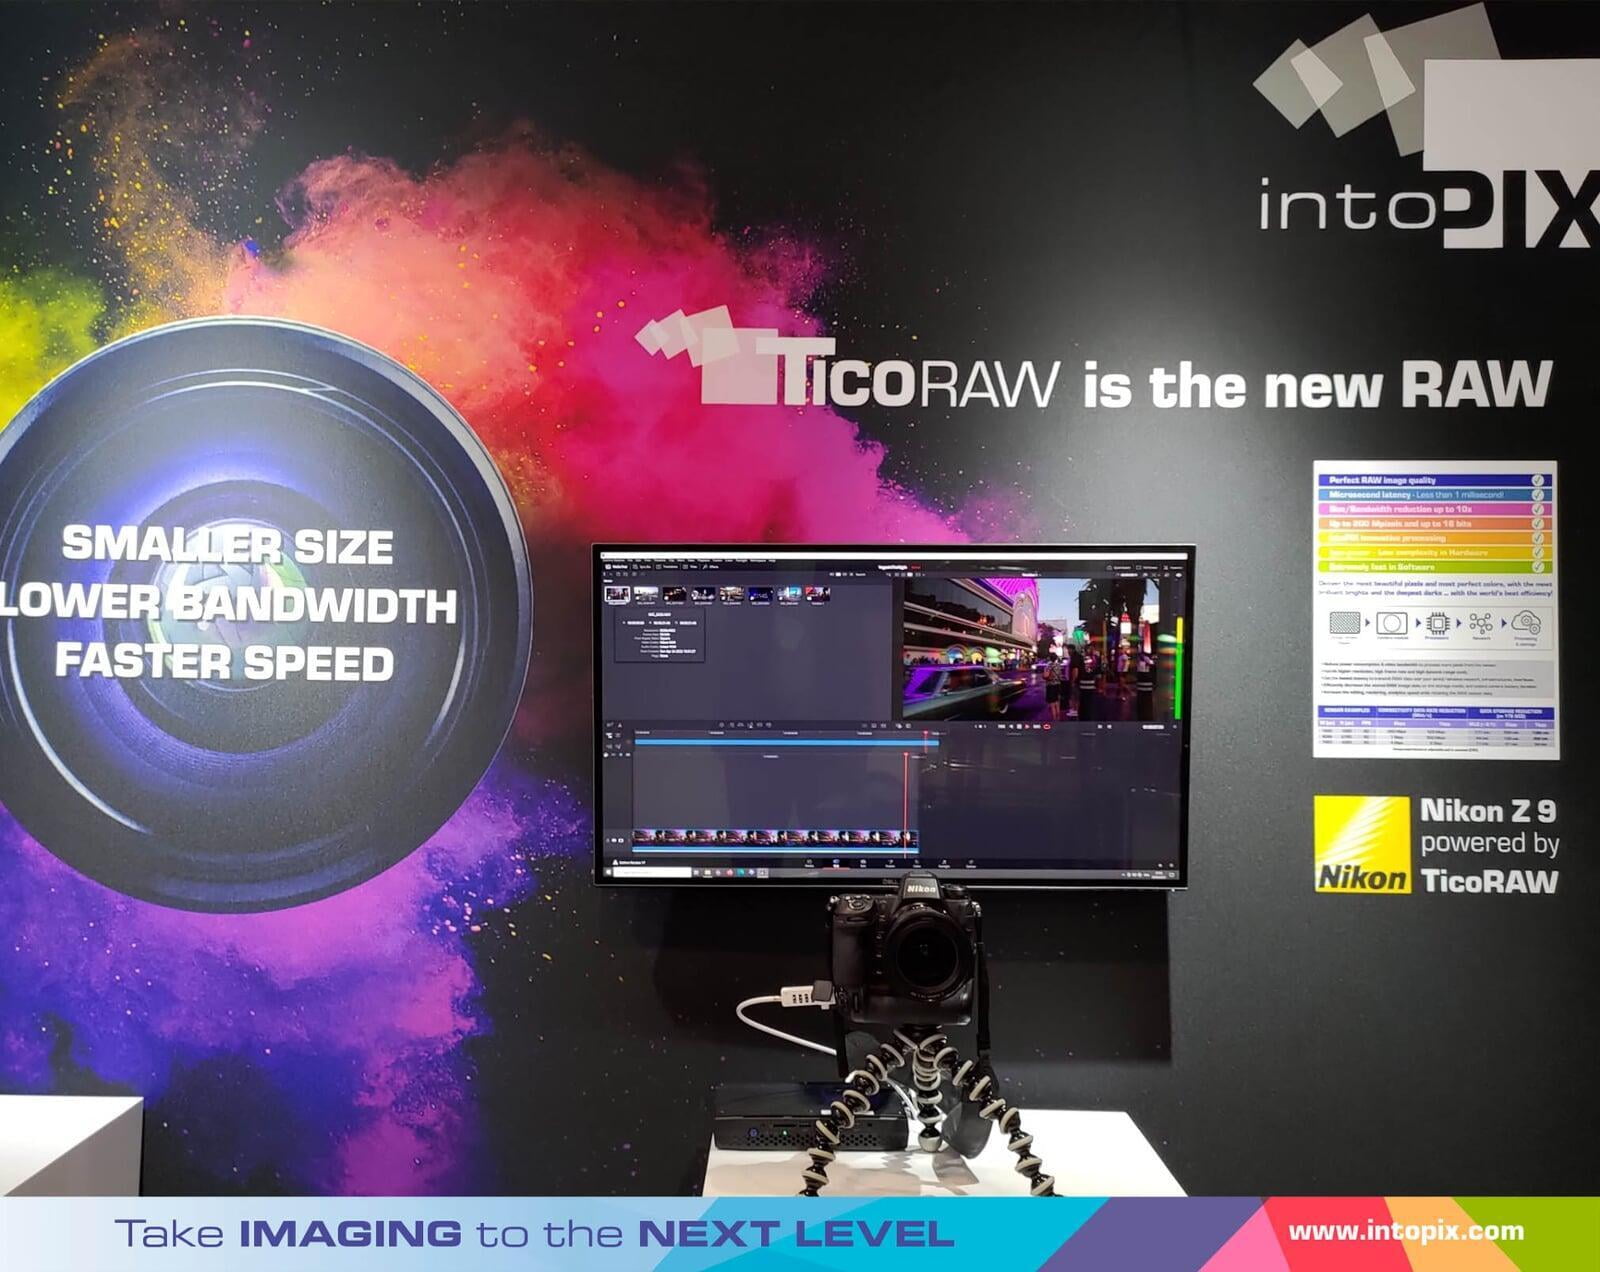 NAB 22: IntoPIX Shows TicoRAW Enabling 8Kp60 capture on the Nikon Z9 and TicoXS enabling 8K AV-over-IP under 1 Gbp/s